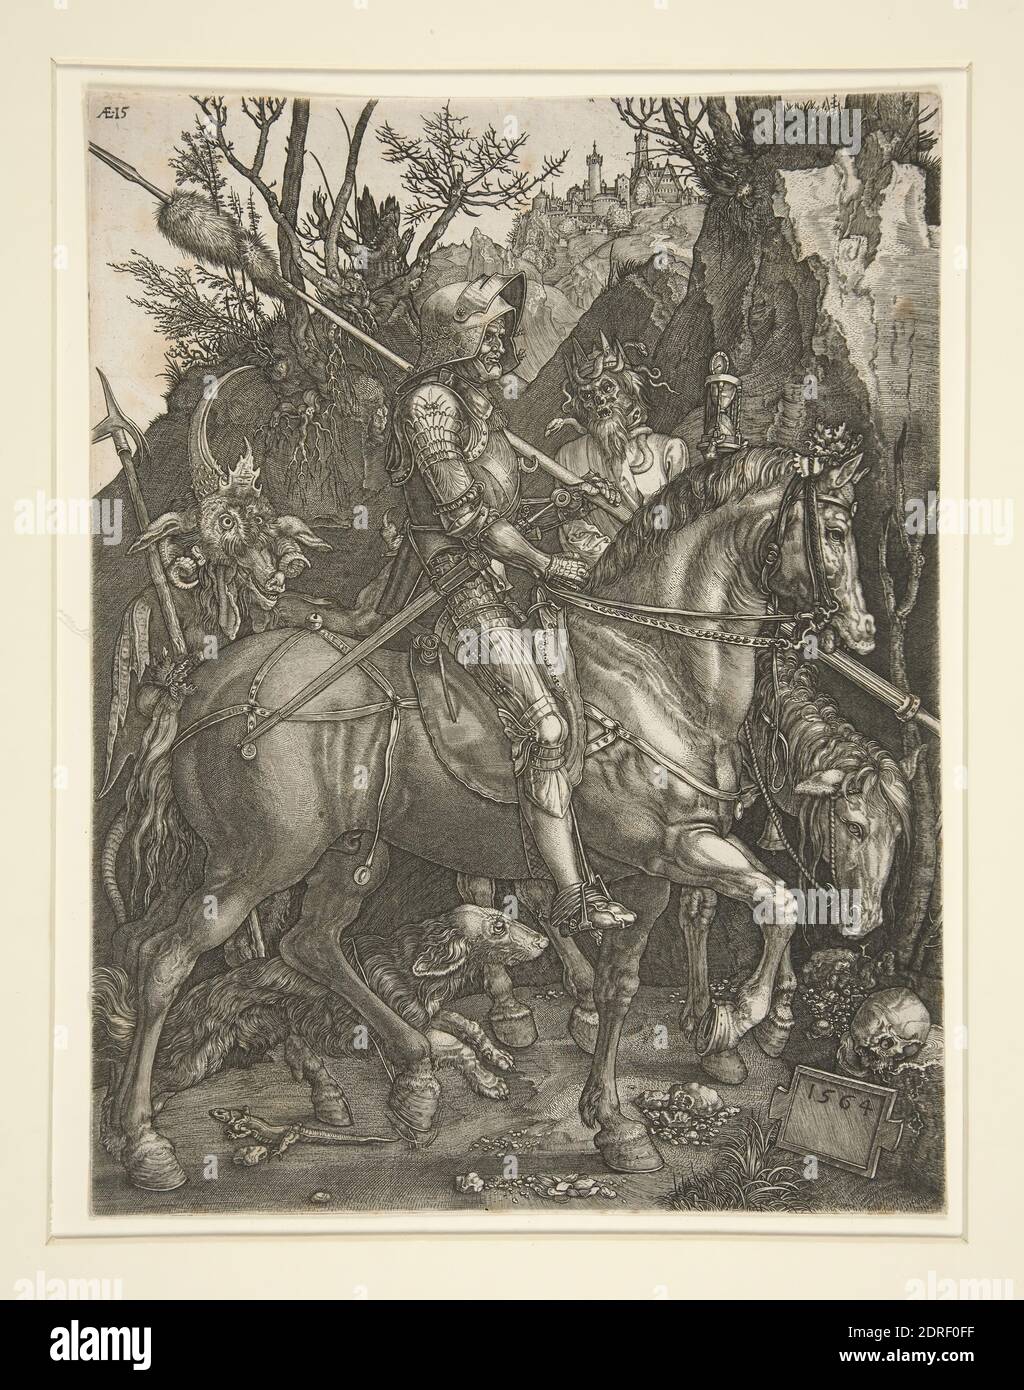 Artist: Johannes Wierix, Flemish, 1549–ca. 1618, After: Albrecht Dürer, German, 1471–1528, Knight, Death and the Devil, Engraving, platemark: 24.7 × 18.2 cm (9 3/4 × 7 3/16in.), Made in Flanders, Flemish, 16th century, Works on Paper - Prints Stock Photo